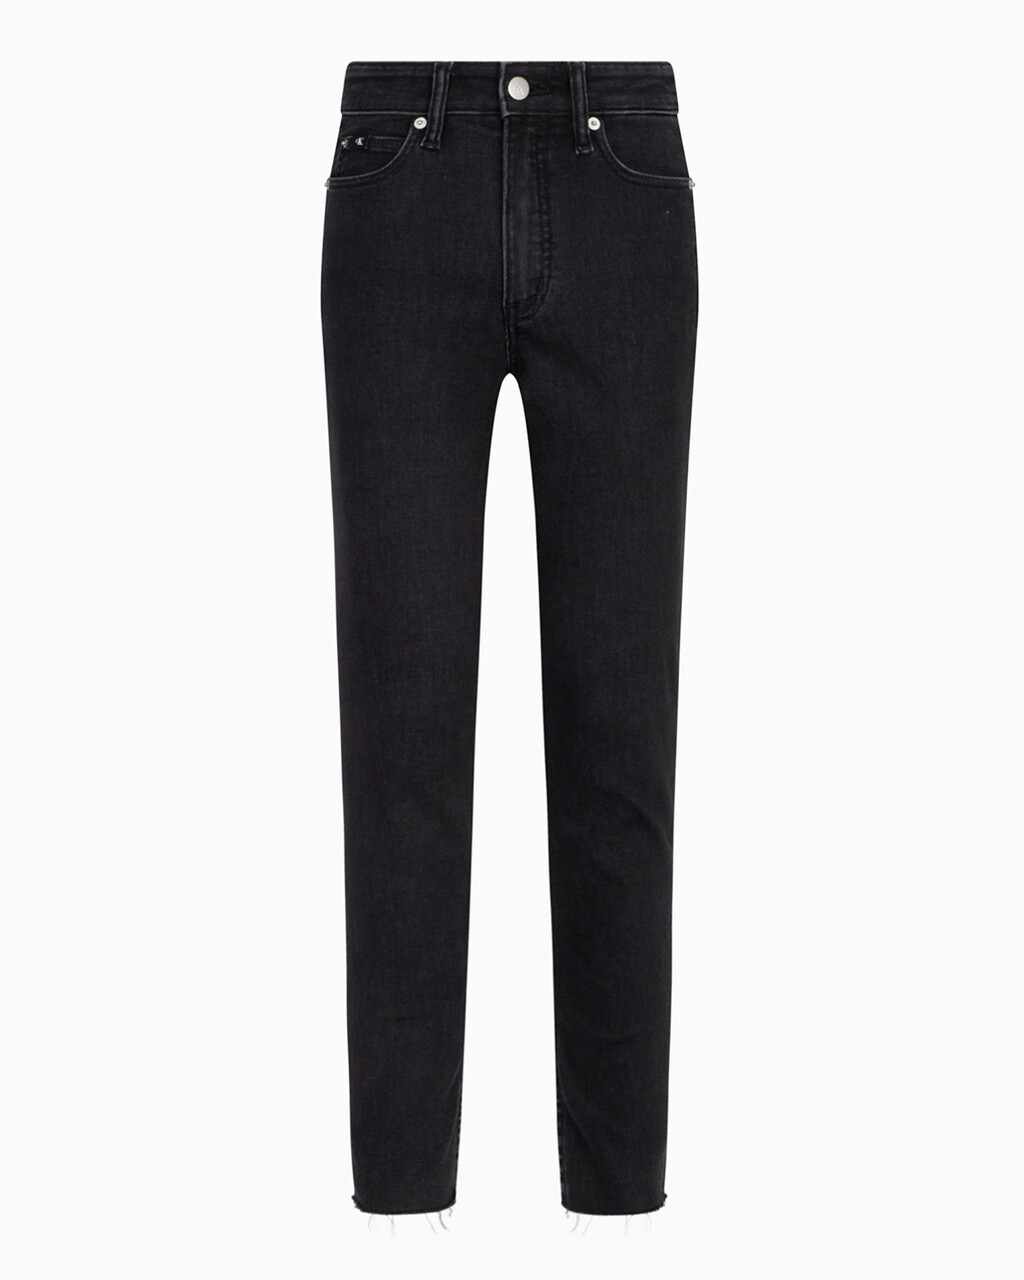 37.5 RECONSIDERED HIGH RISE SKINNY ANKLE JEANS, Black Rwh, hi-res